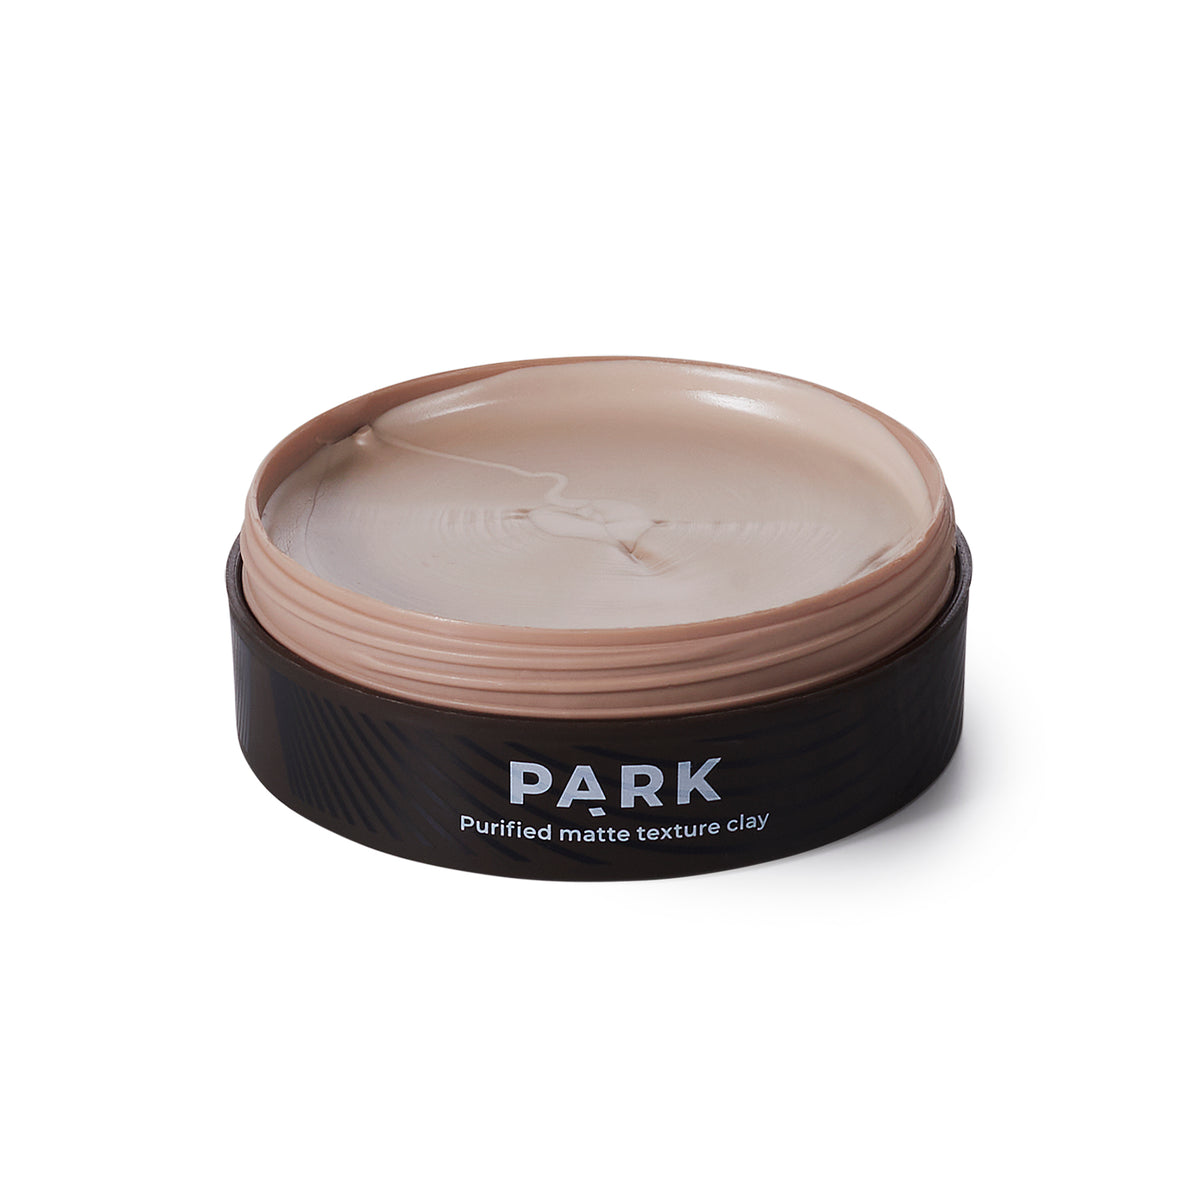 Purified matte texture clay